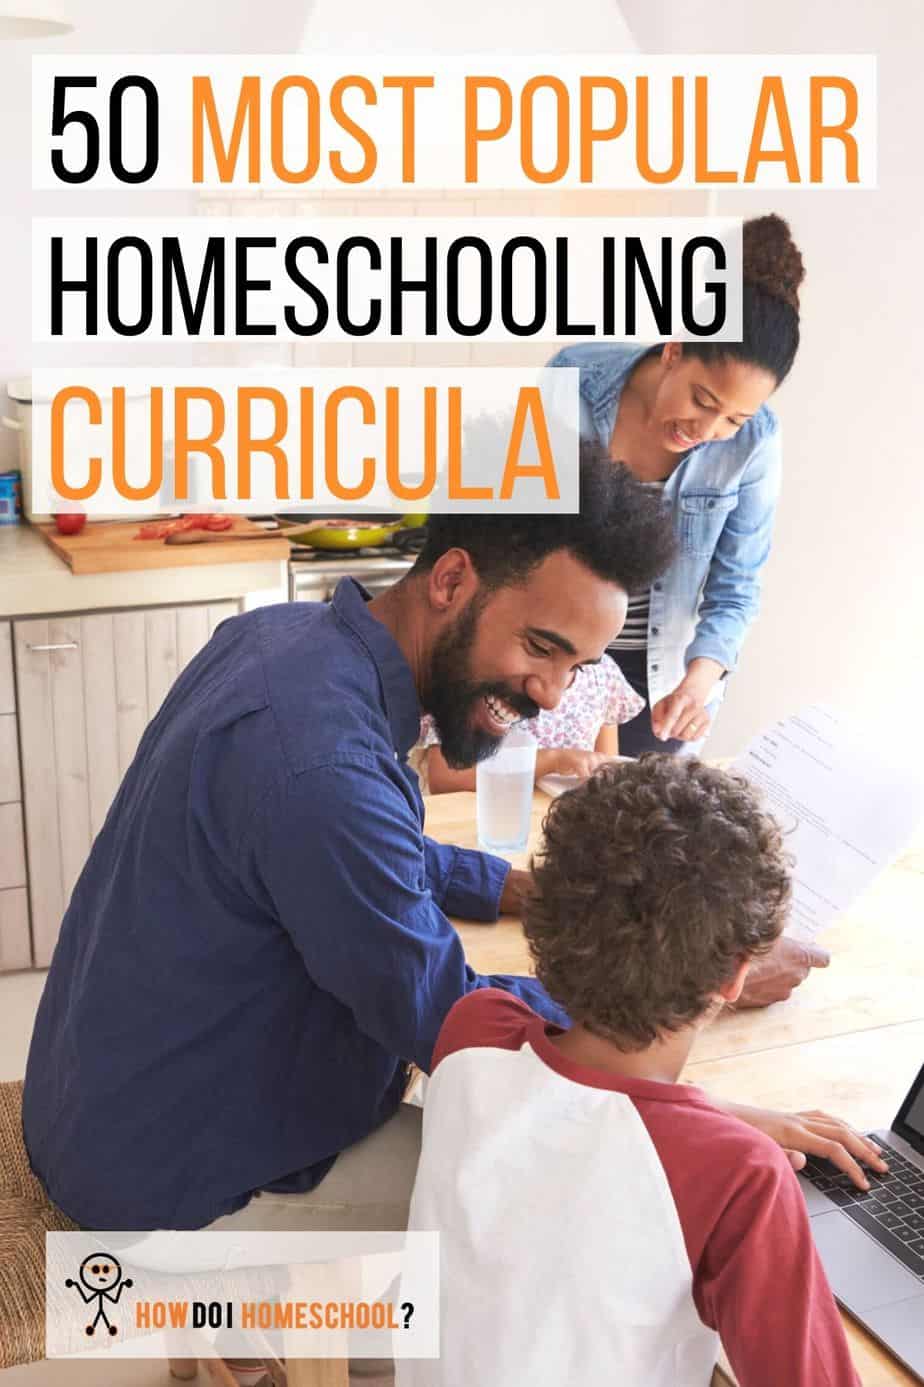 50 Most Popular Homeschooling Curriculum in 2020. Check out some great programs available today. #besthomeschoolcurriculum #tophomeschoolcurriculum